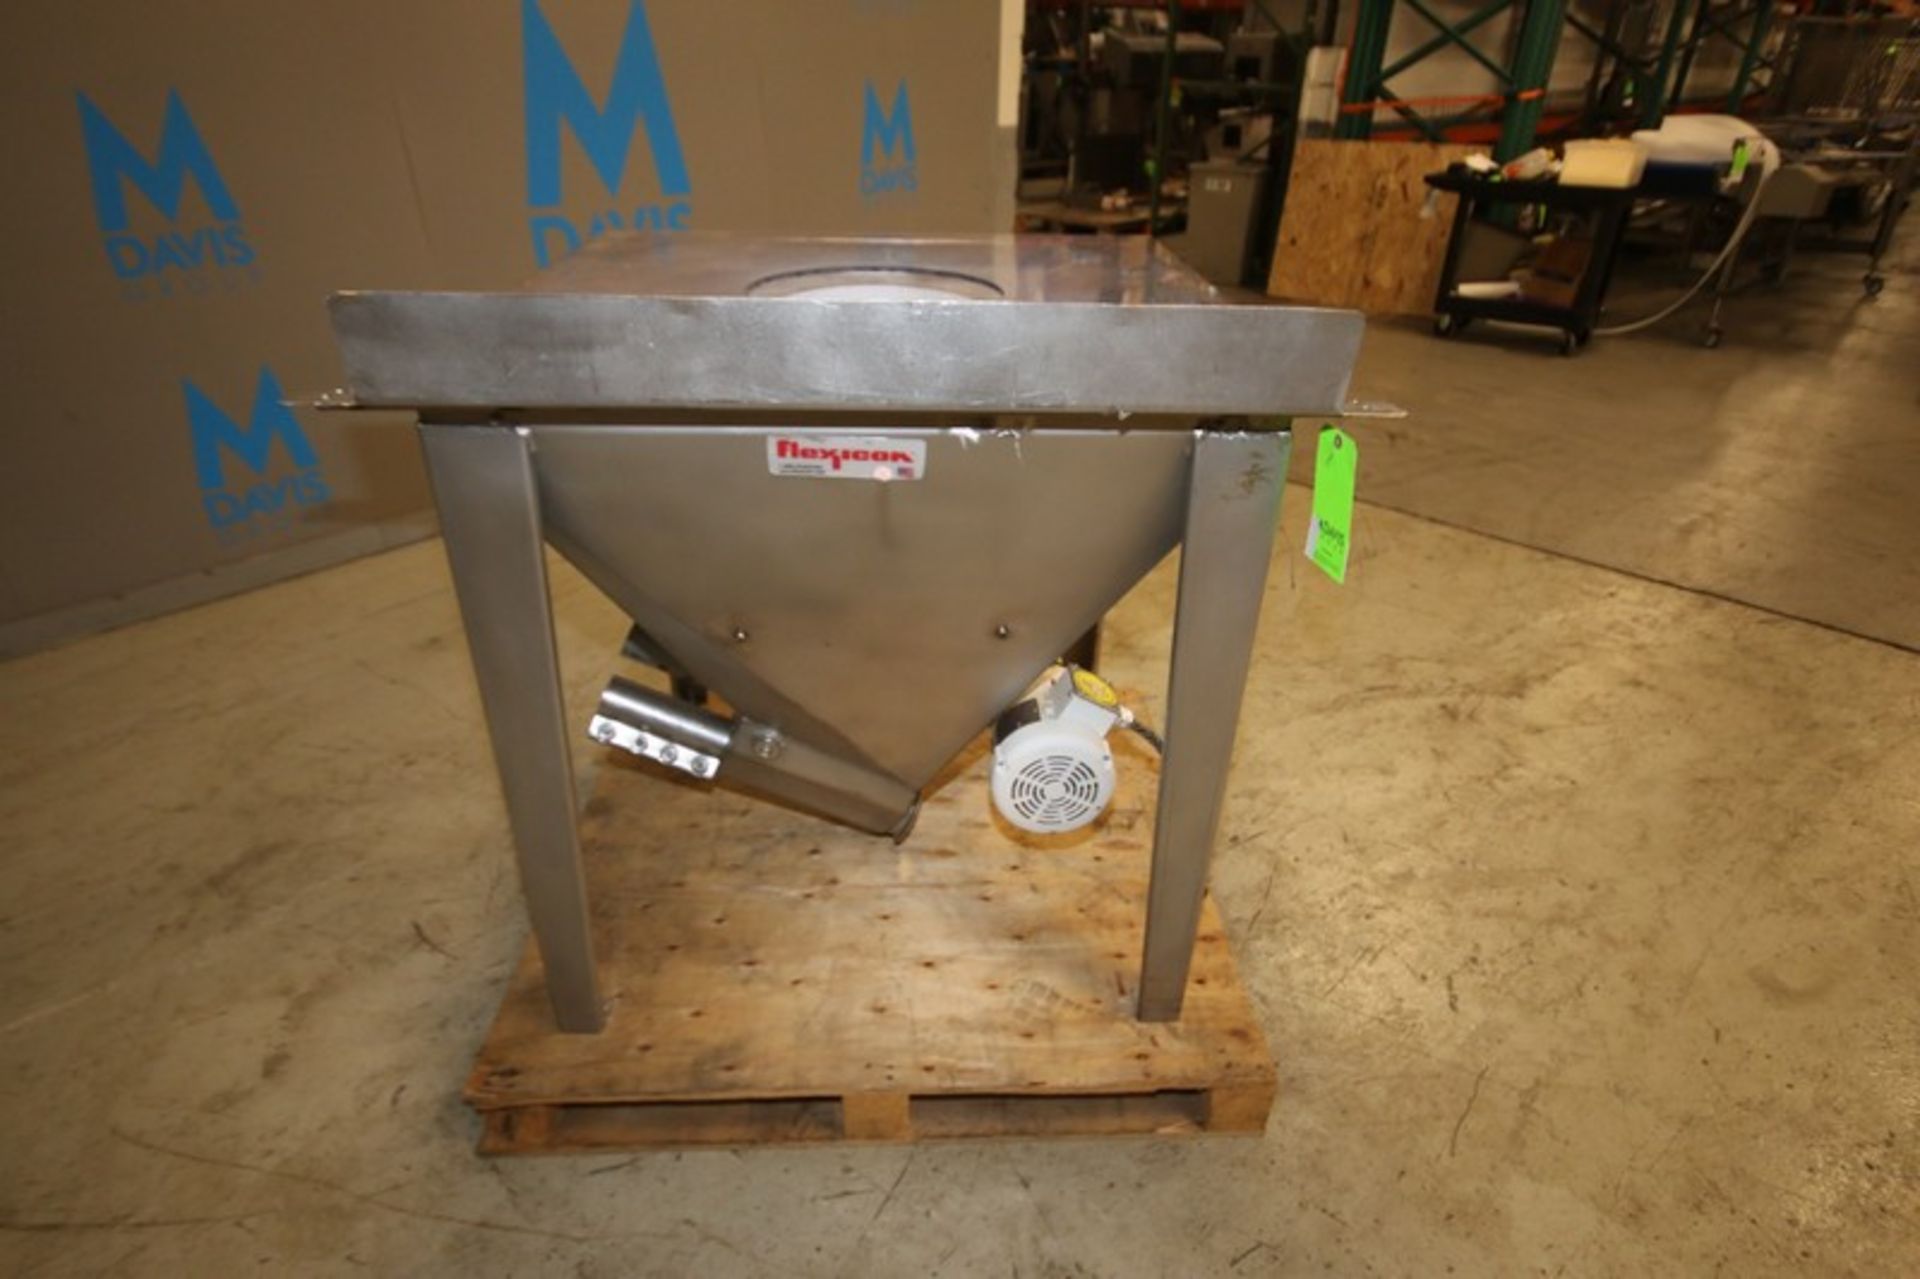 Flexicon 36" x 36" x 37" H S/S Feed Hopper with Leeson 1/2 1/3 hp Bottom Side Mixer / Drive Motor - Image 5 of 5